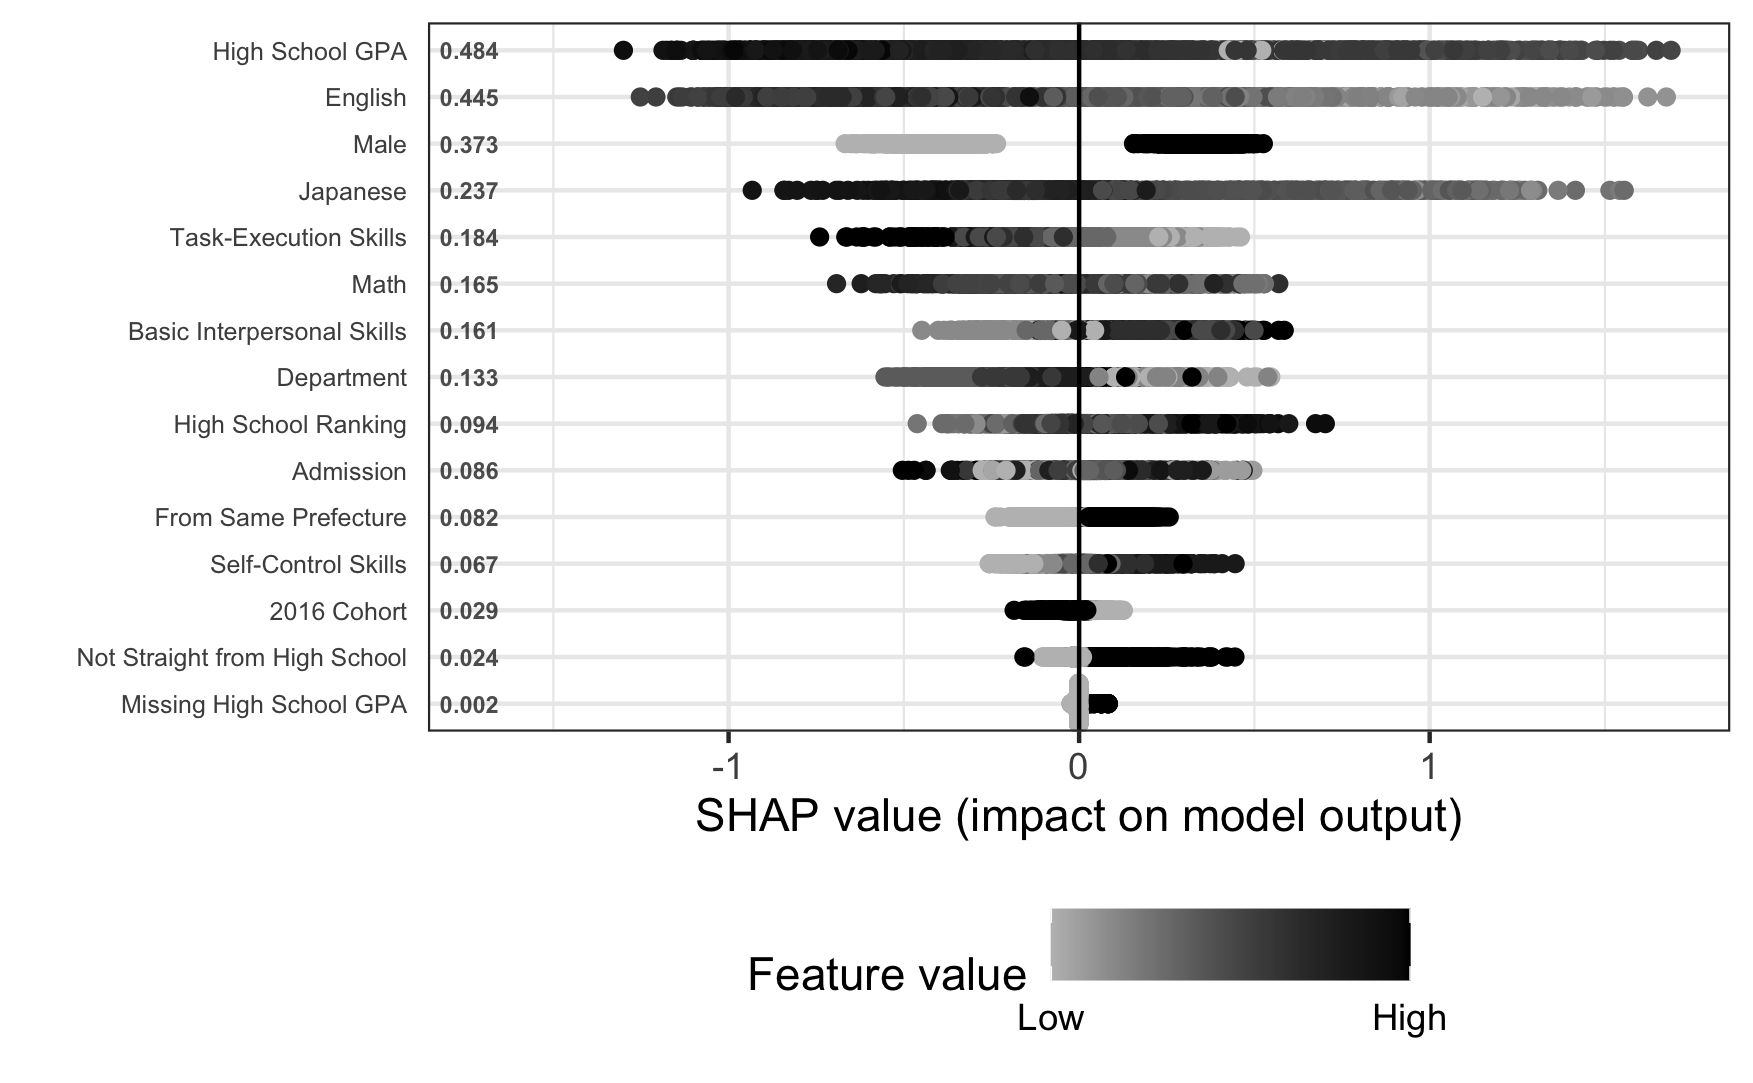 This graph displays the SHAP value for XGB-based Model 2, which includes PROG data, visualizing how the feature variables contributed to the model's risk calculation. It is important to note that these SHAP values reflect mere mechanical correlation based on the provided data, not necessarily the actual relationships in the real world. For example, among non-academic skills, lower task execution skills increase the risk, but lower basic interpersonal and self-control skills reduce the risk. The latter relationship is inconsistent with the literature, validating our suspicion that the model may be missing important predictors critical to GPA prediction.